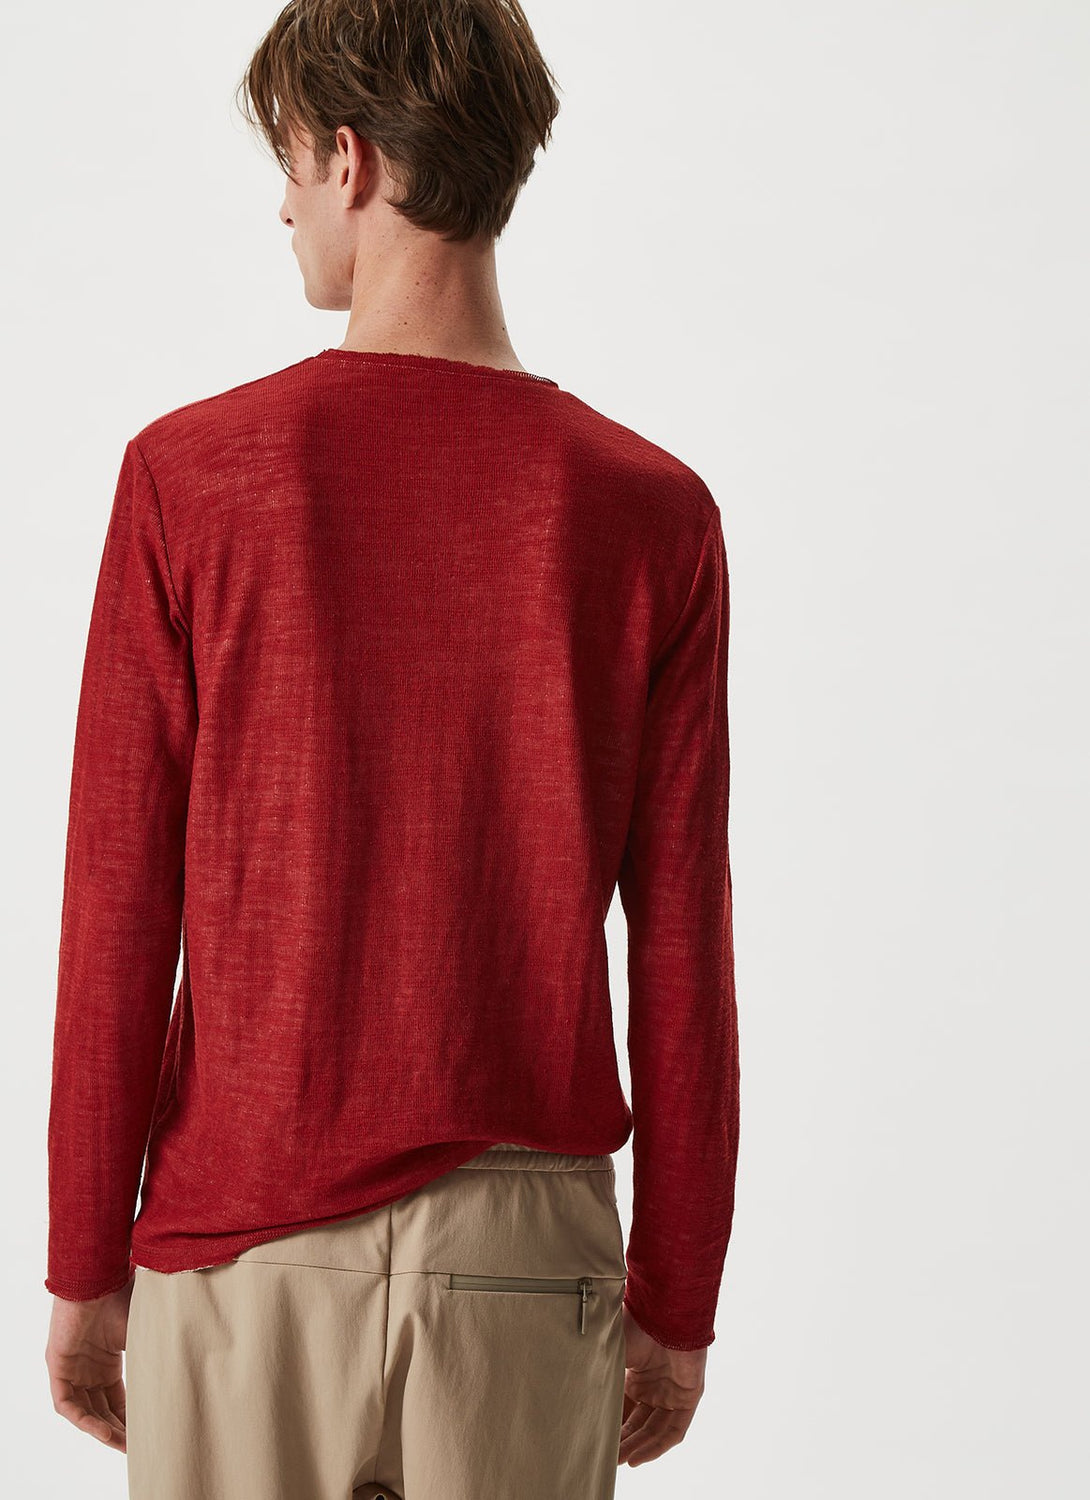 Men Long-Sleeve T-Shirt | Red Long-Sleeved T-Shirt With Raw Edges by Spanish designer Adolfo Dominguez